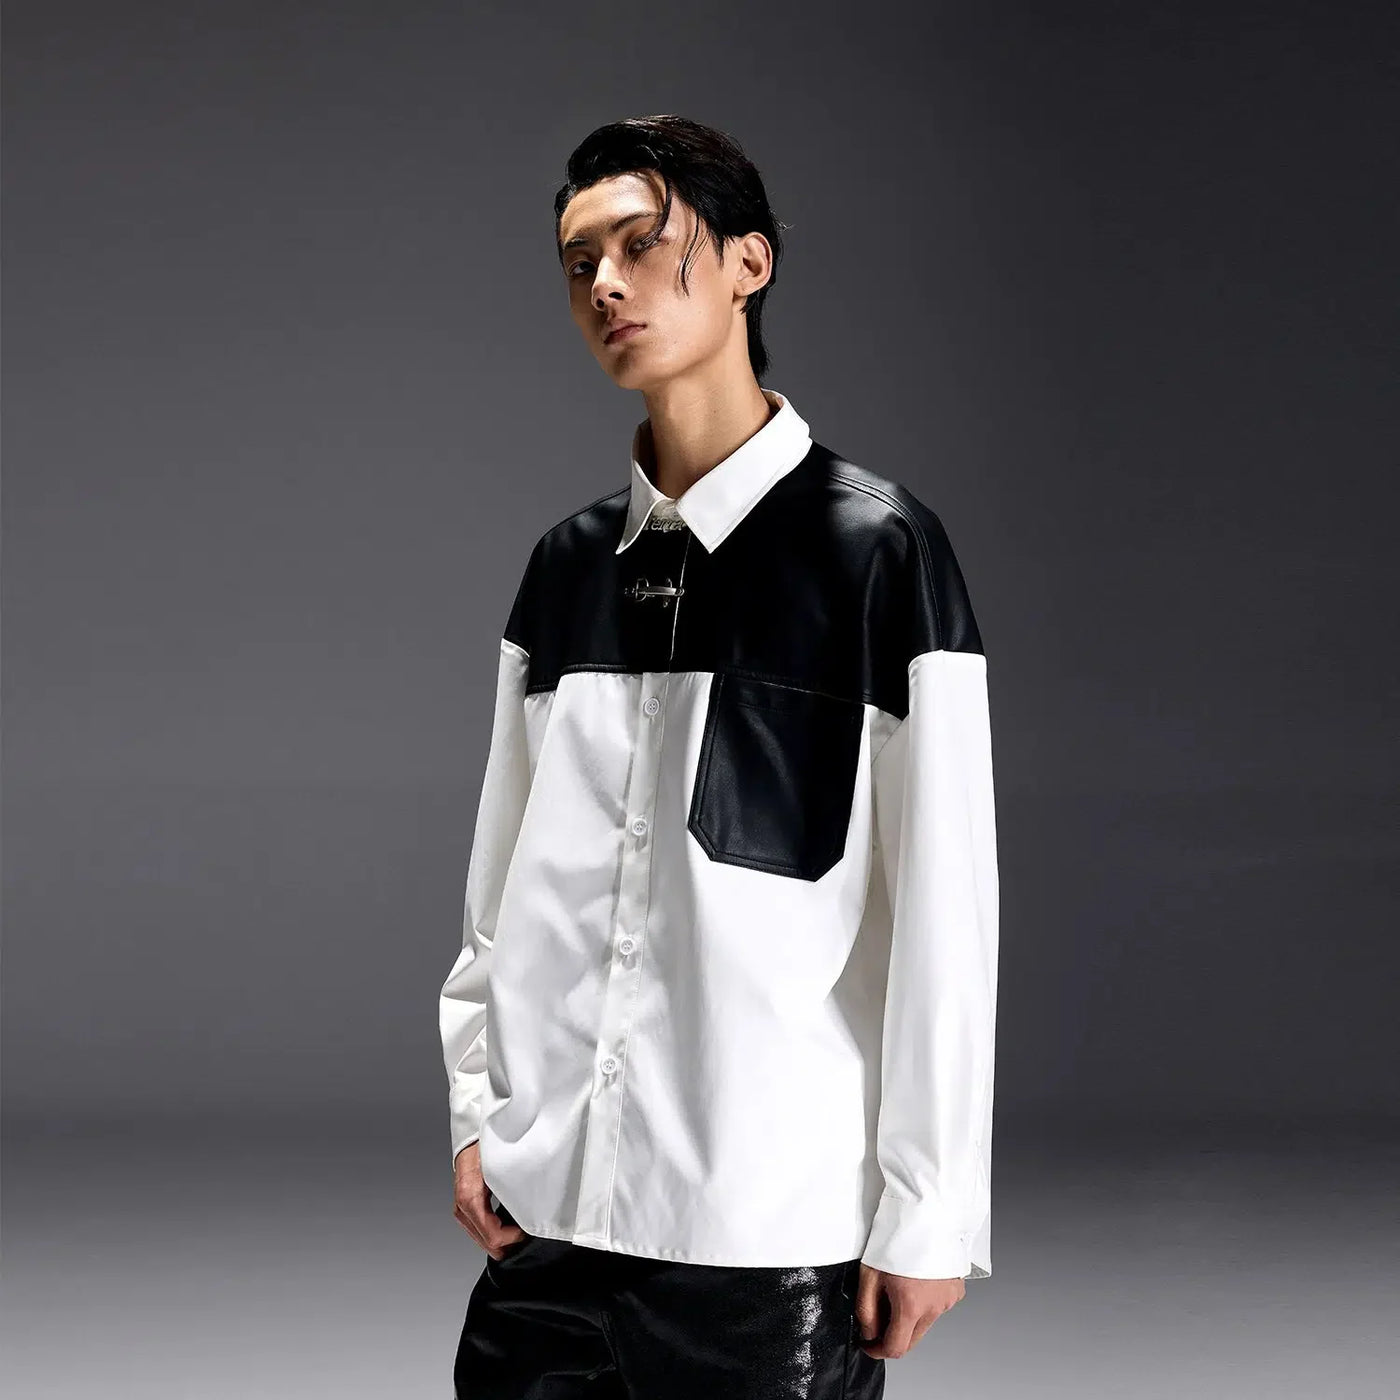 Faux Leather Contrast Shirt Korean Street Fashion Shirt By Terra Incognita Shop Online at OH Vault